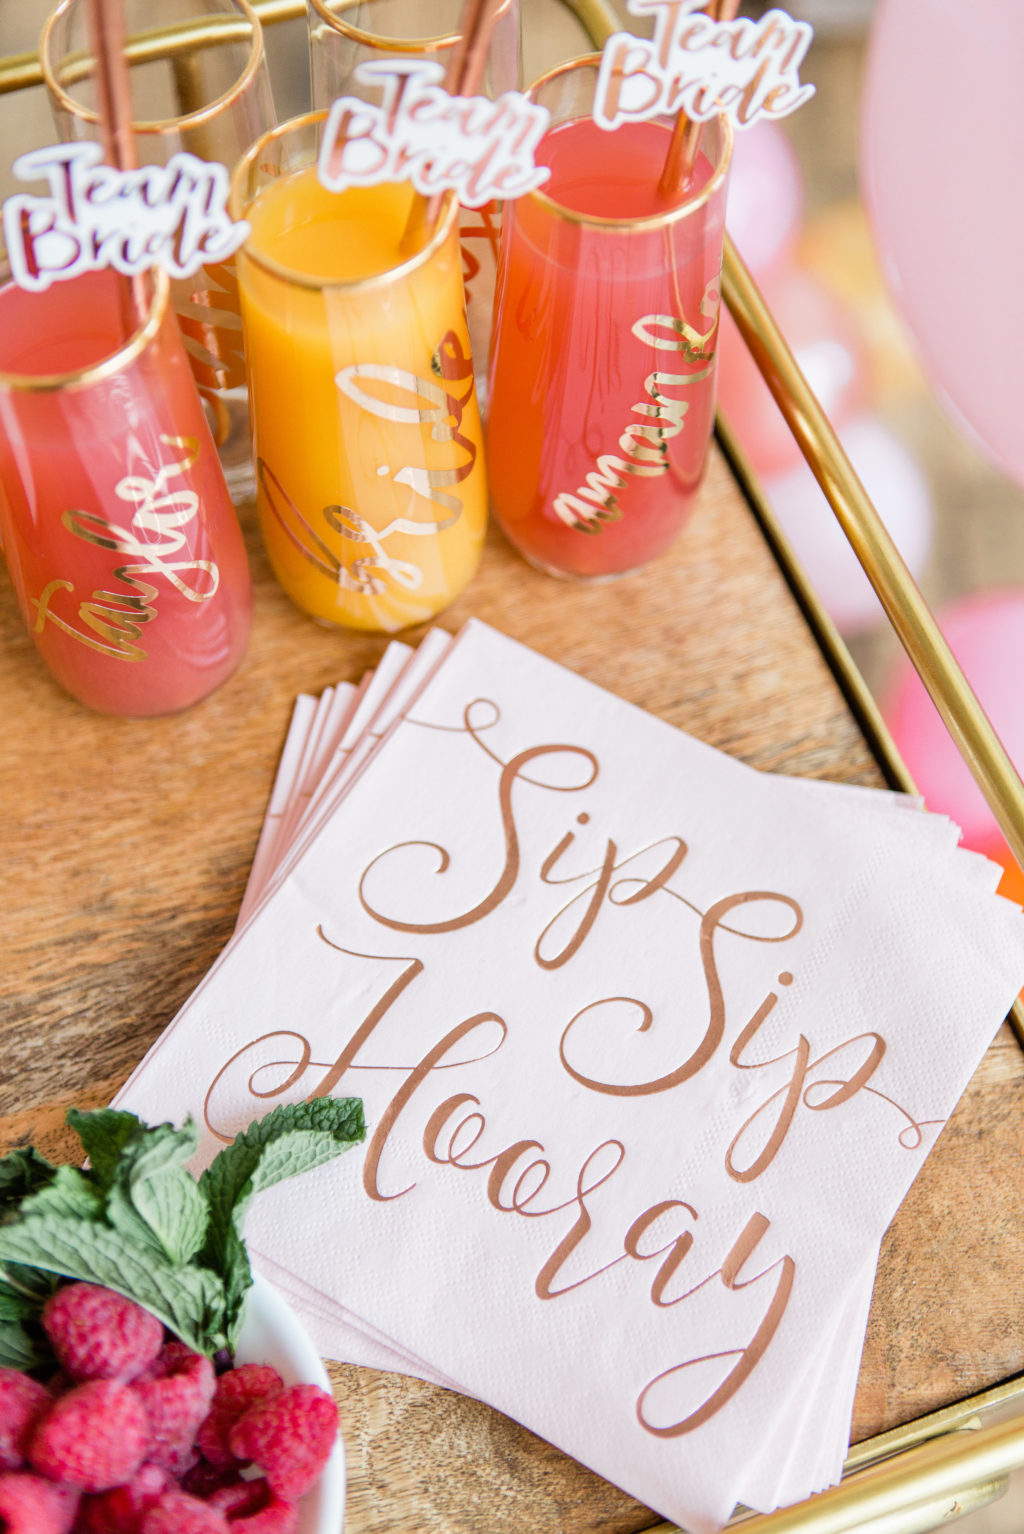 Davids Bridal bridesmaid shower inspiration Photography by Lauryn 06